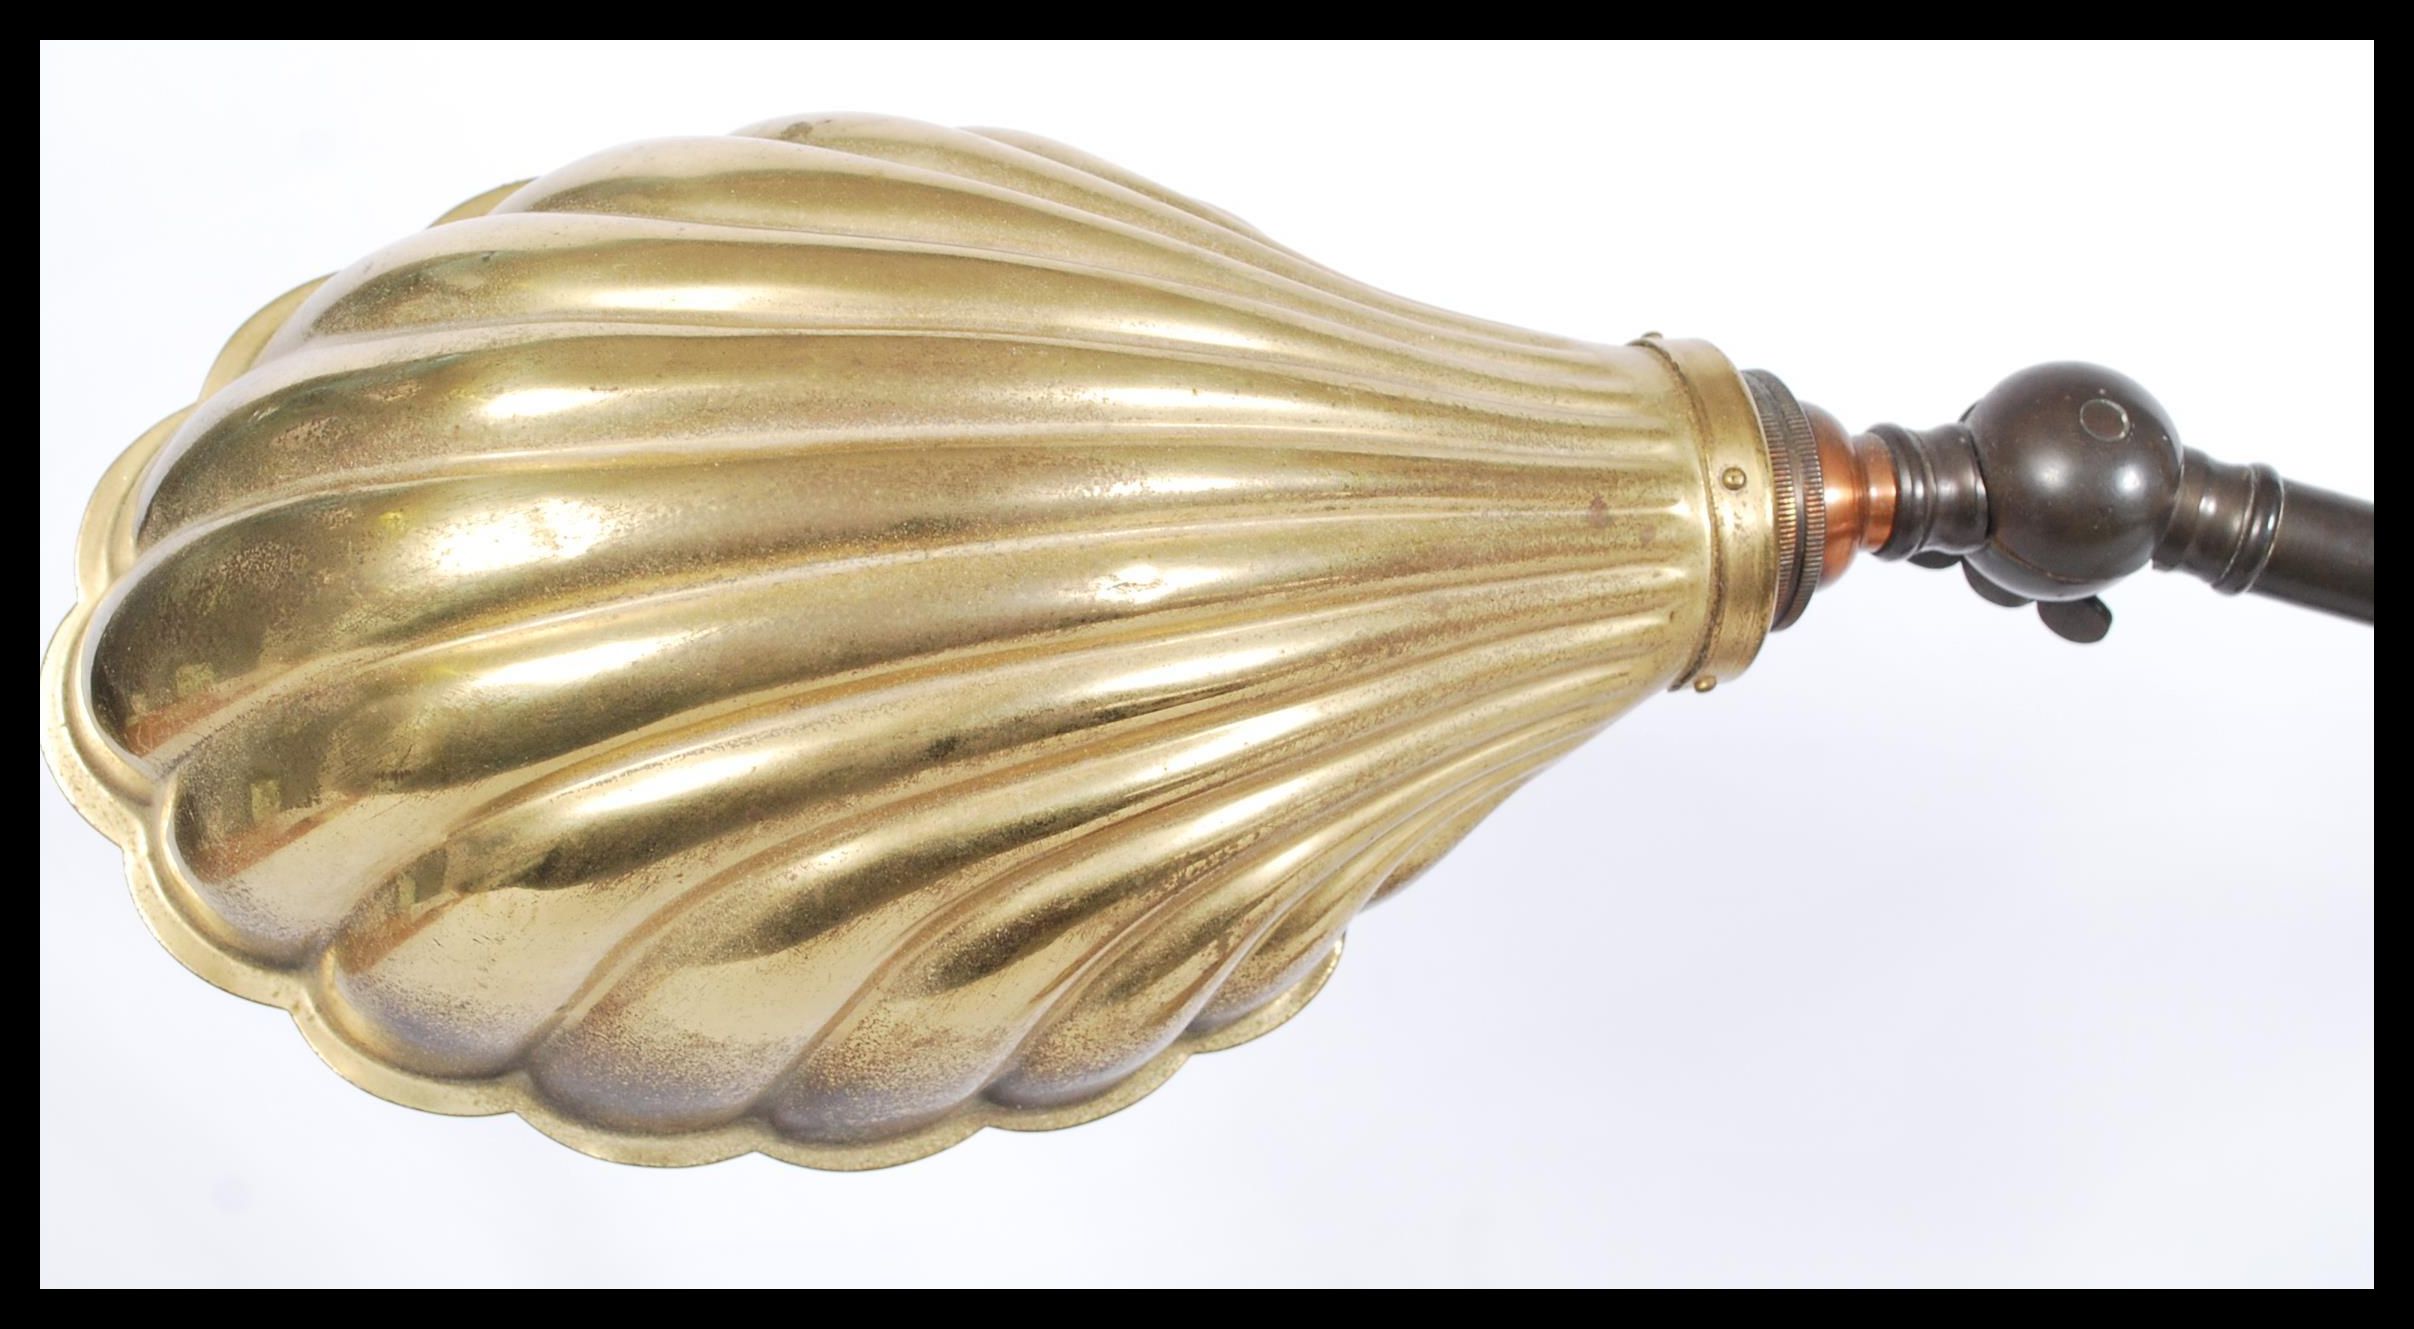 An early 20th century Industrial anglepoise brass lamp with goose neck adjustable neck, cast iron - Image 2 of 5